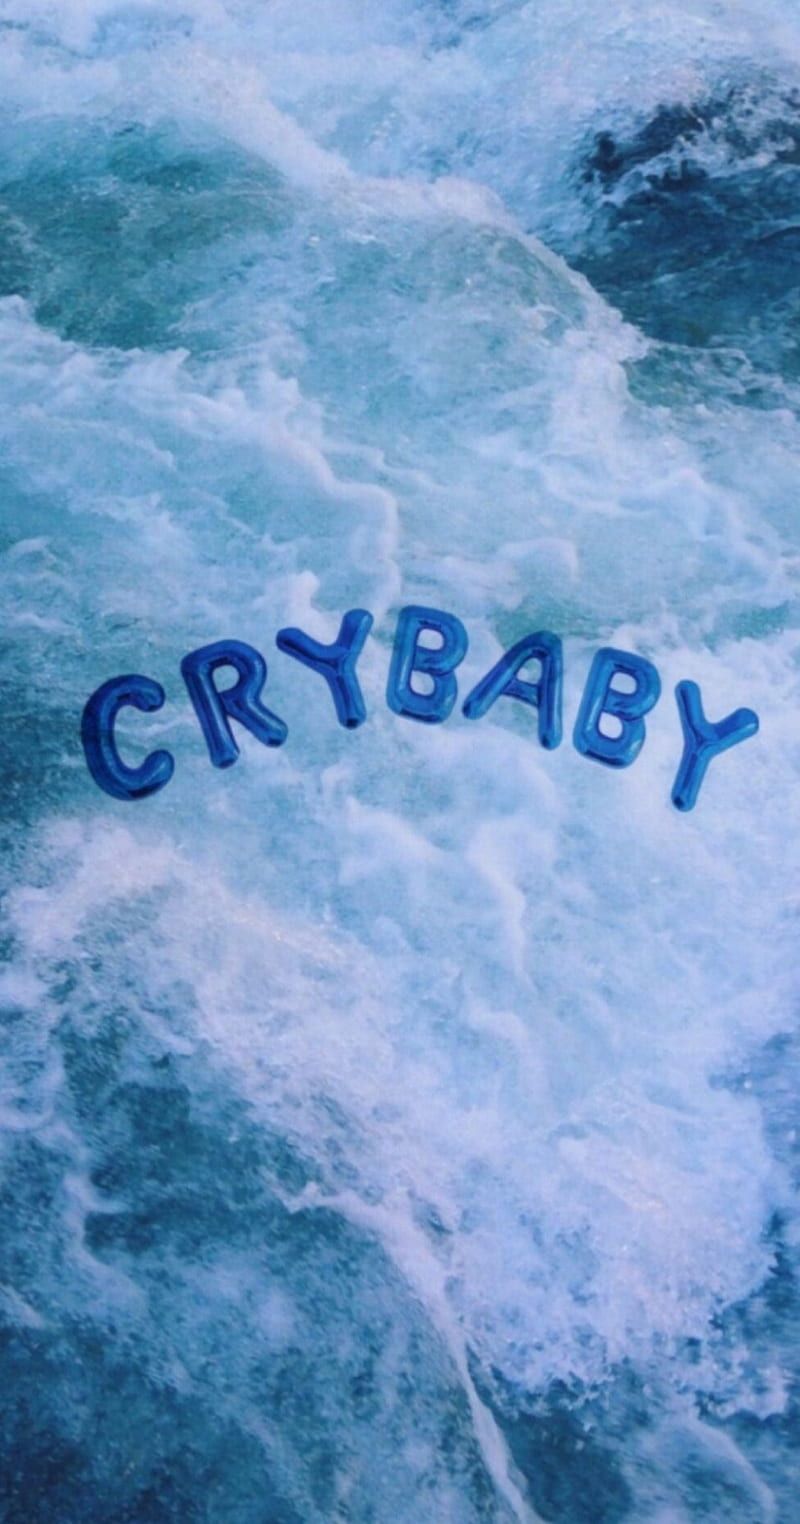 A blue aesthetic wallpaper with the words crybaby in blue - Melanie Martinez